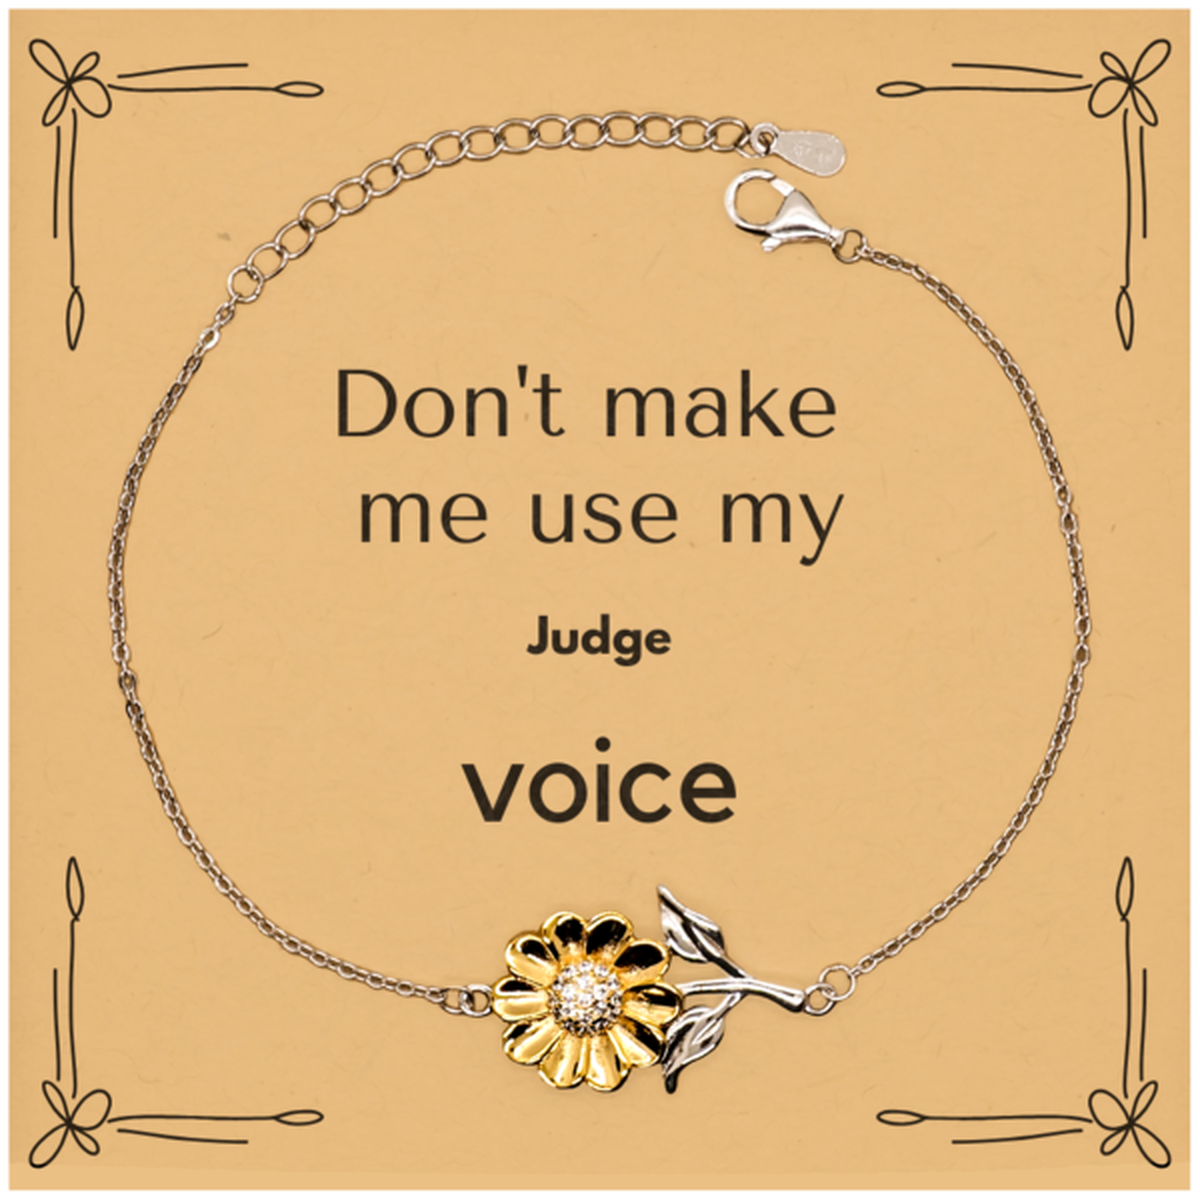 Don't make me use my Judge voice, Sarcasm Judge Card Gifts, Christmas Judge Sunflower Bracelet Birthday Unique Gifts For Judge Coworkers, Men, Women, Colleague, Friends